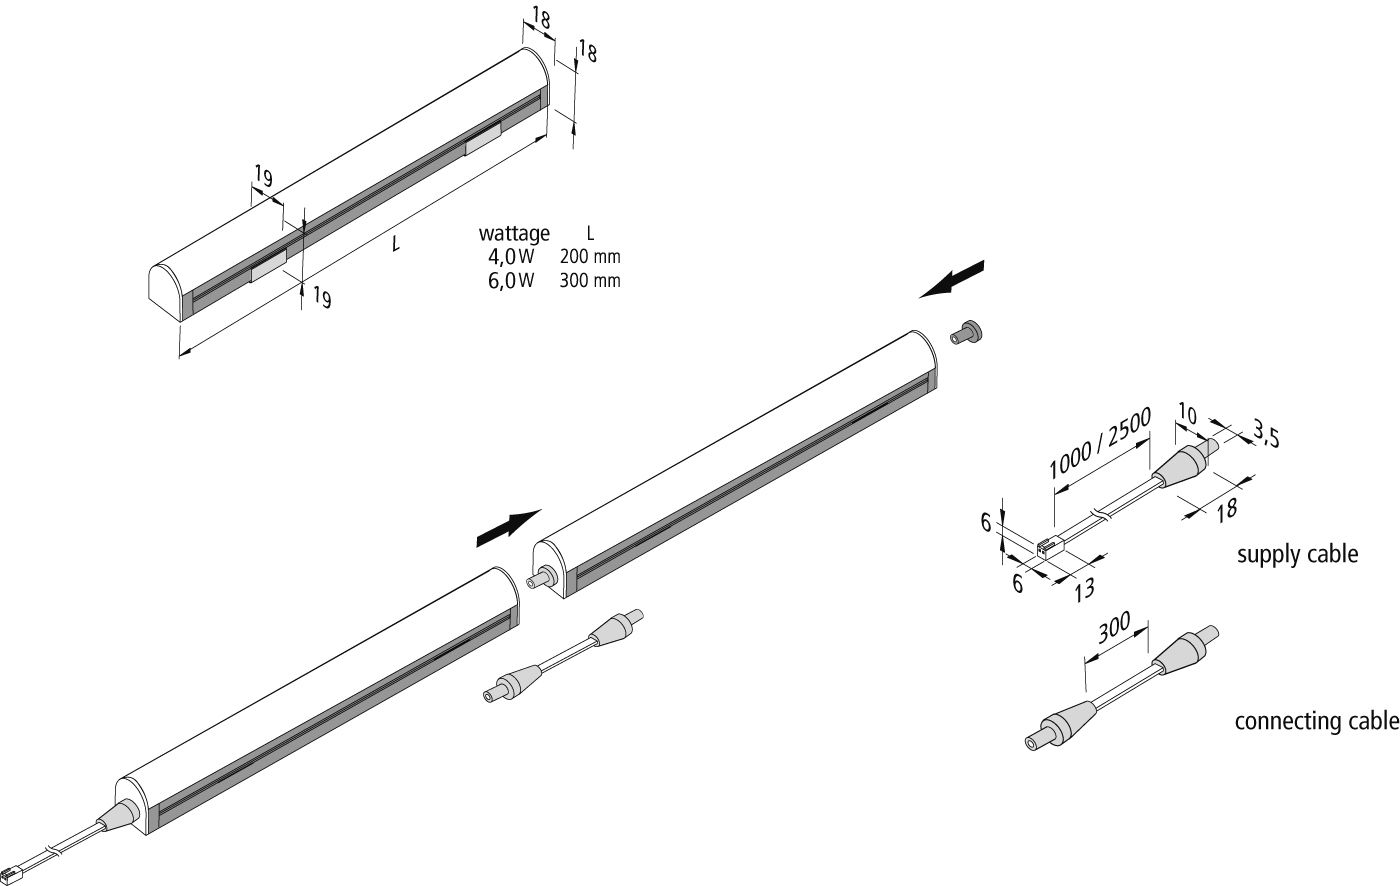 Preview: Powerful, pluggable, homogeneous linear luminaire 24V DC with IP65 Evo-Stick F2